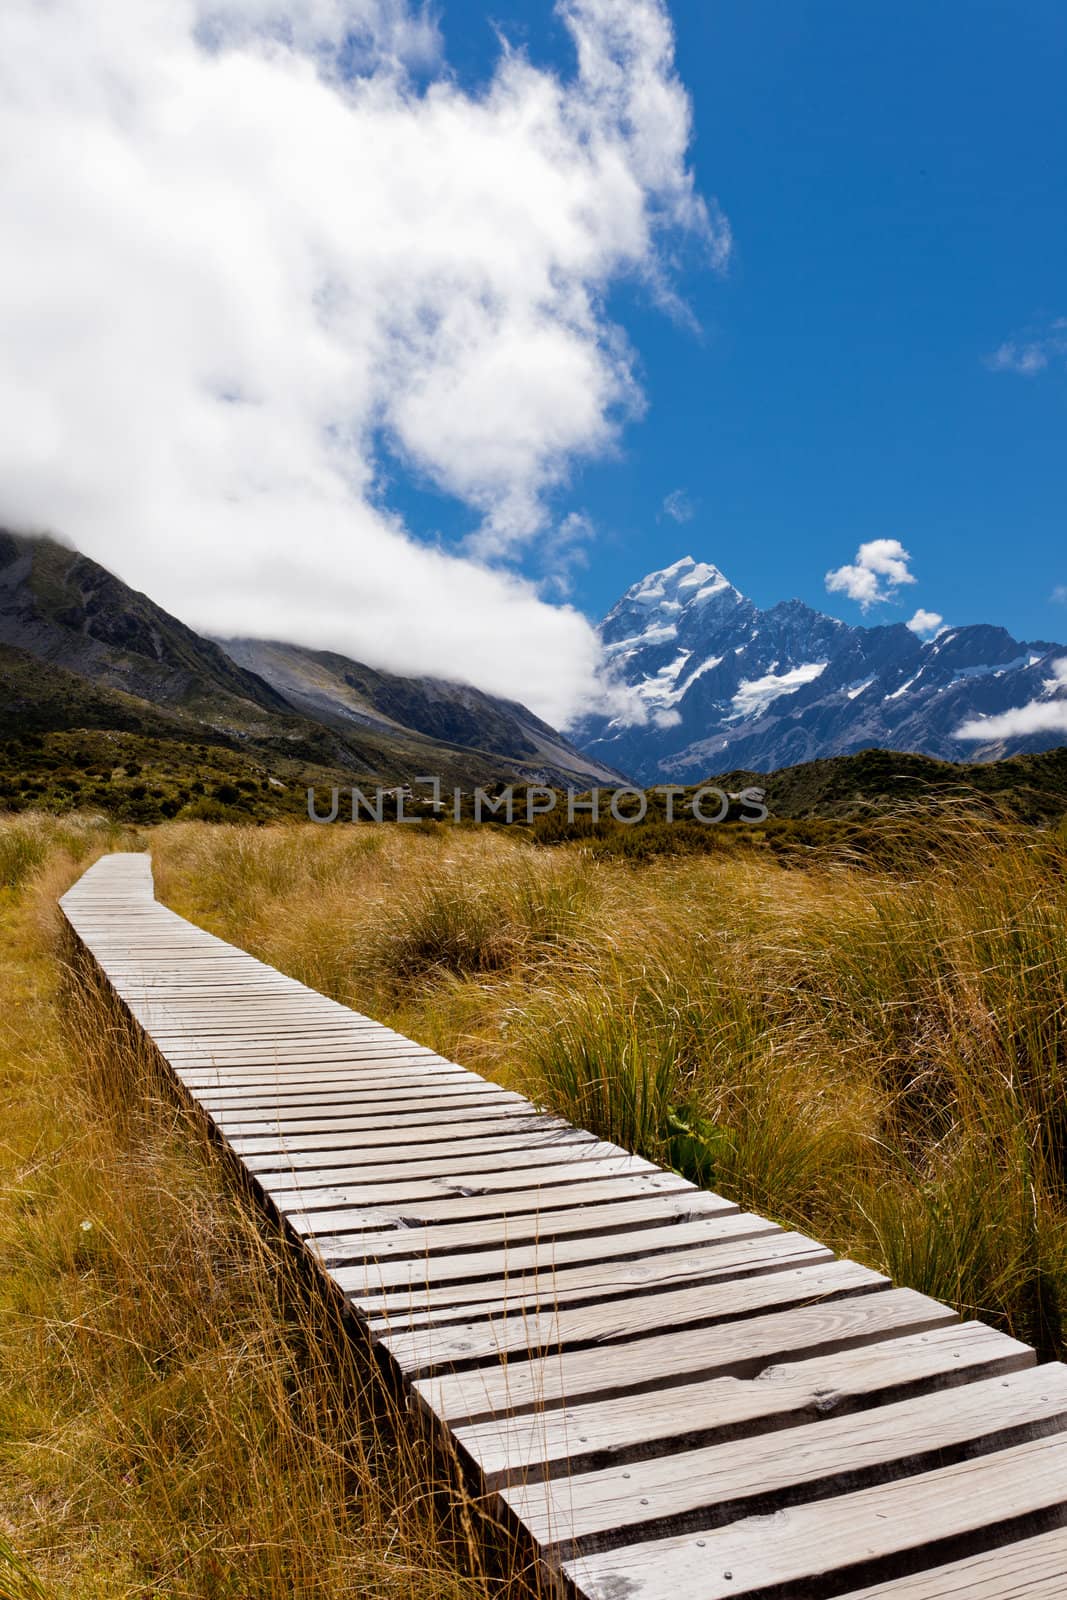 Boarded trail section in Hooker Valley on a track leading to Aoraki, Mount Cook, highest peak of Southern Alps, an icon of New Zealand partially covered in clouds